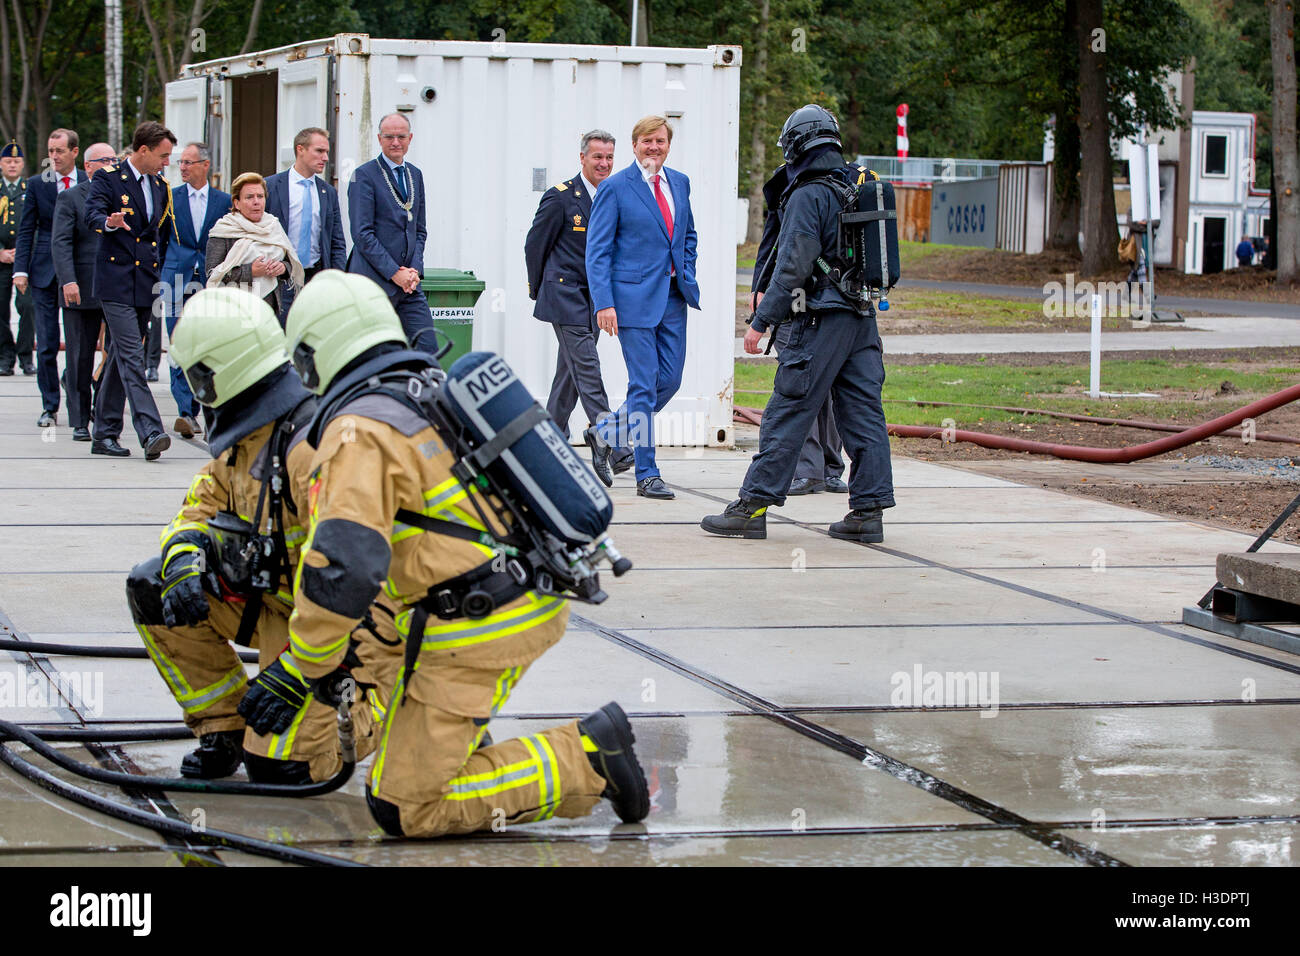 Deurningen, The Netherlands. 6th Oct, 2016. King Willem-Alexander of The Netherlands (C) visits the Twente Safety Campus in Deurningen, The Netherlands, 6 October 2016. At the campus school children and the elderly how to react in dangerous situations. Photo: Patrick van Katwijk//POINT DE VUE OUT/dpa/Alamy Live News Stock Photo